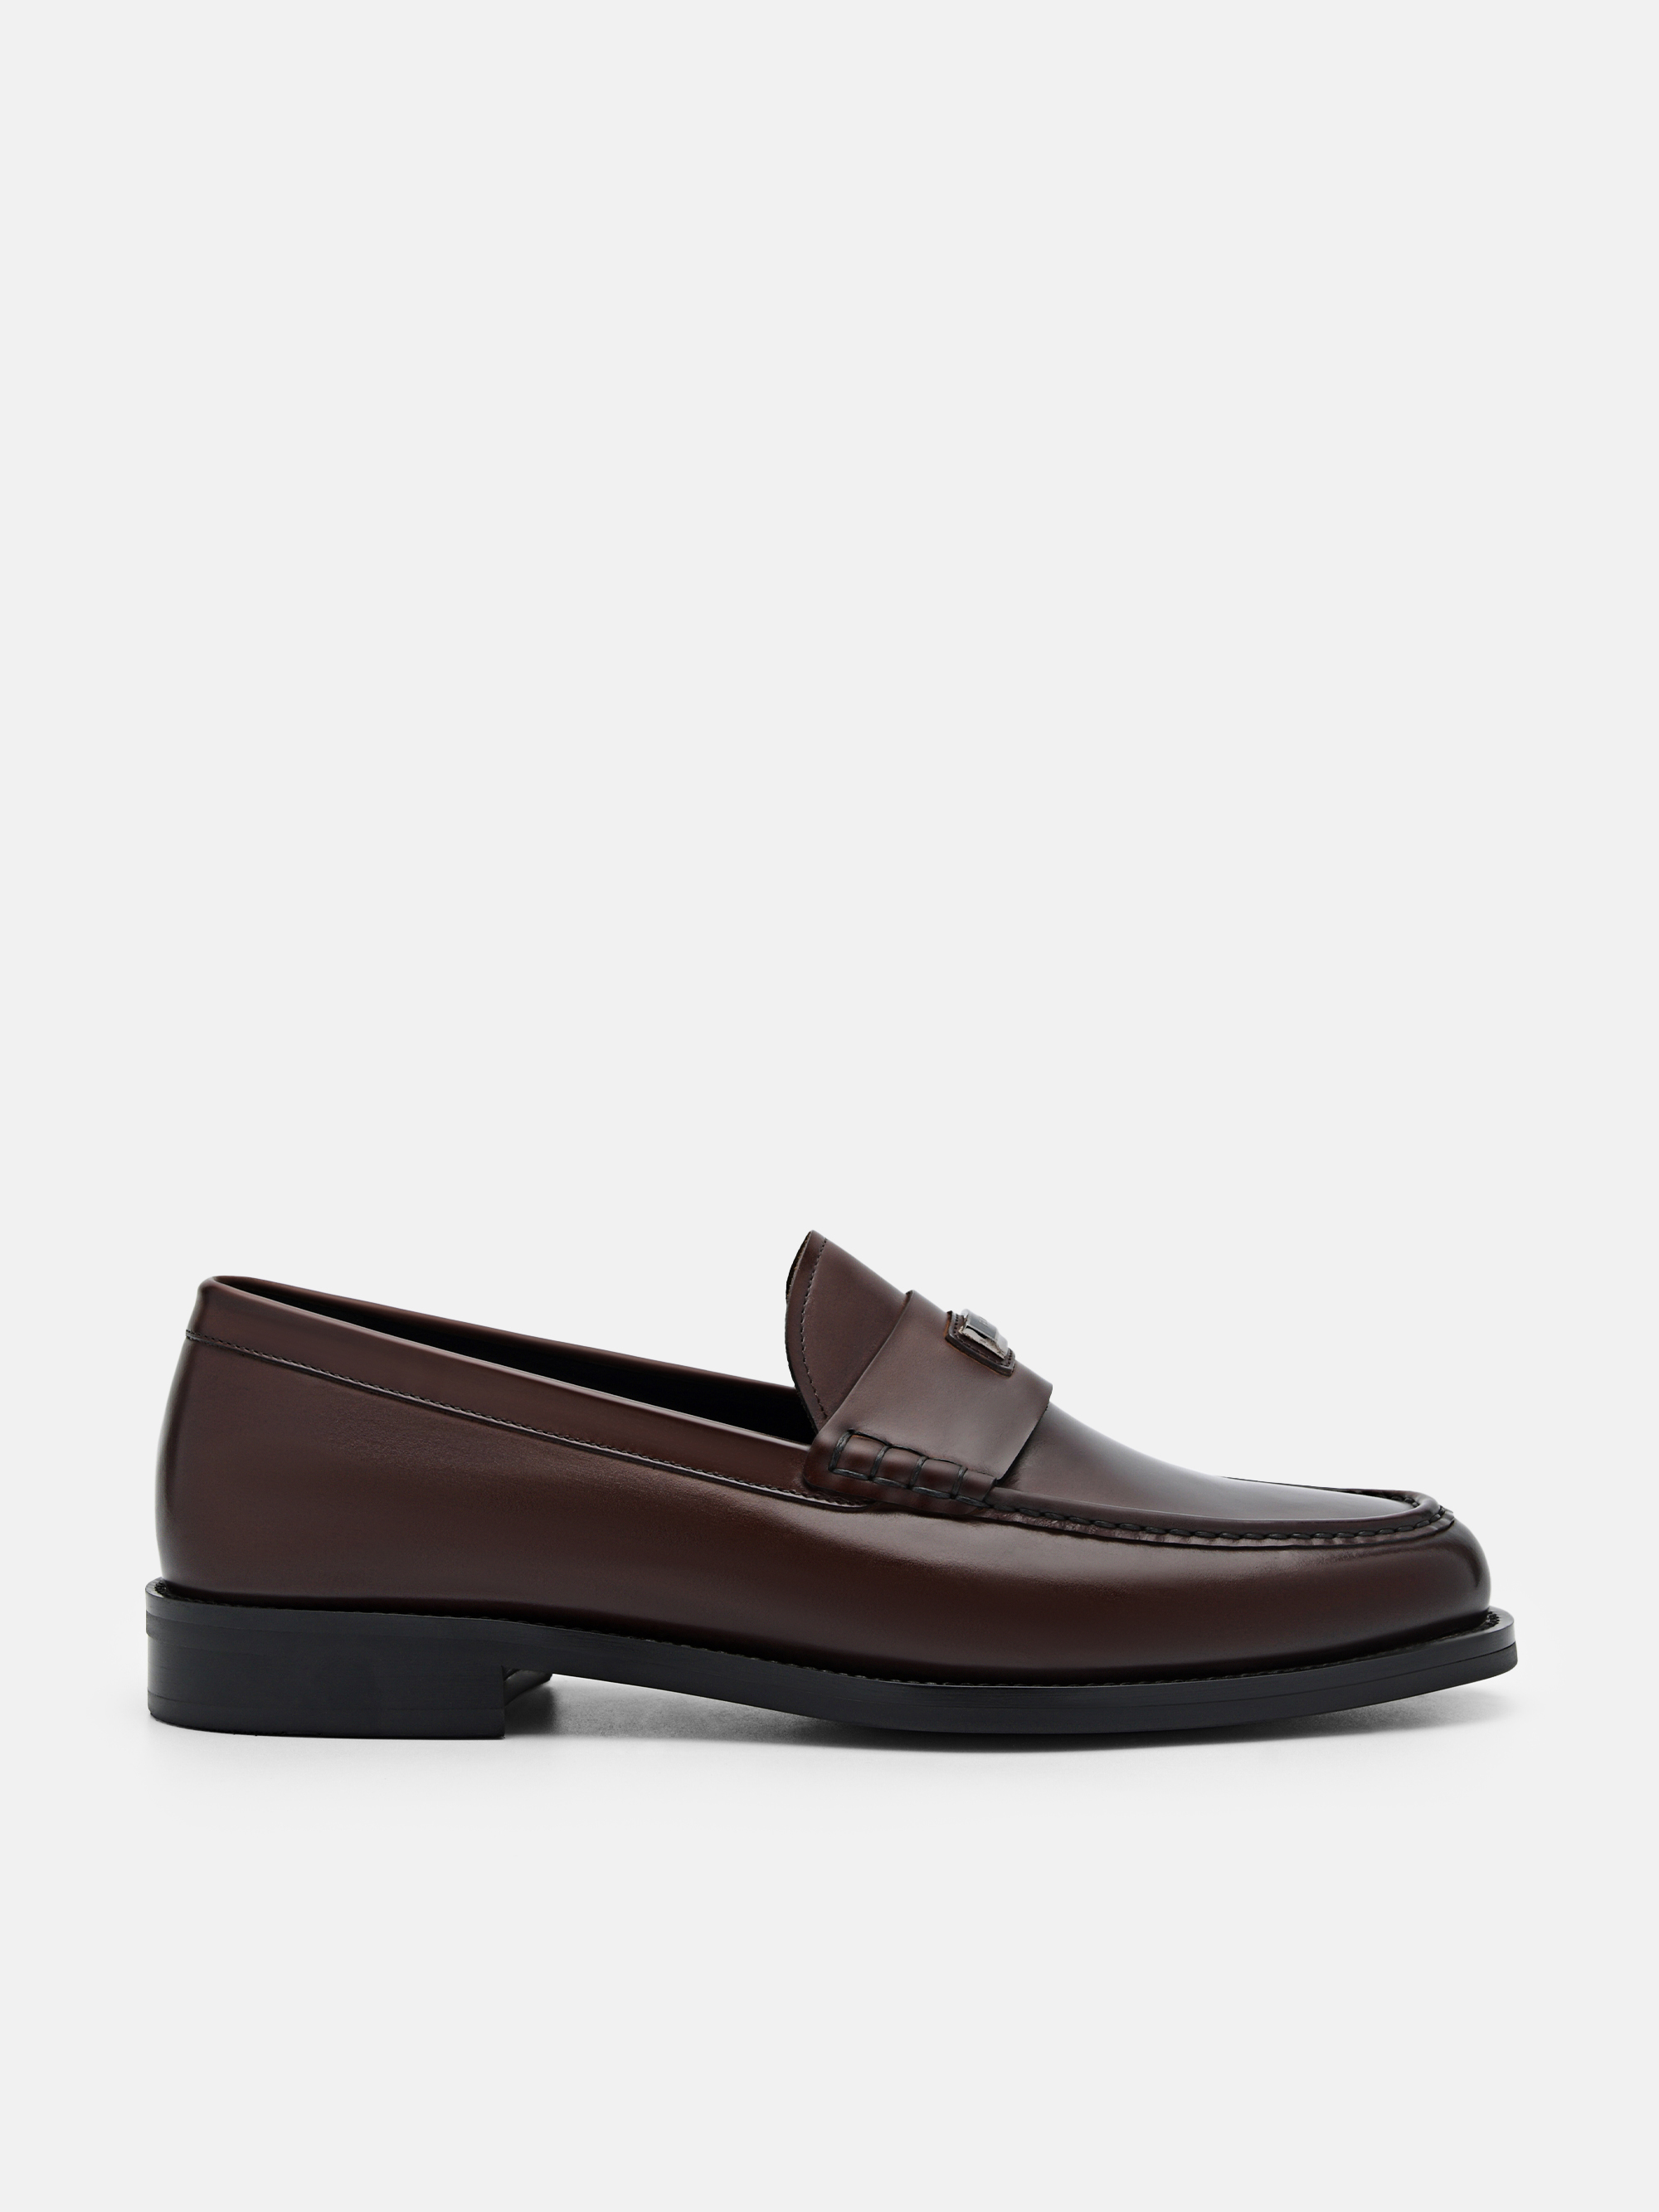 Brown Leather Loafers - PEDRO International